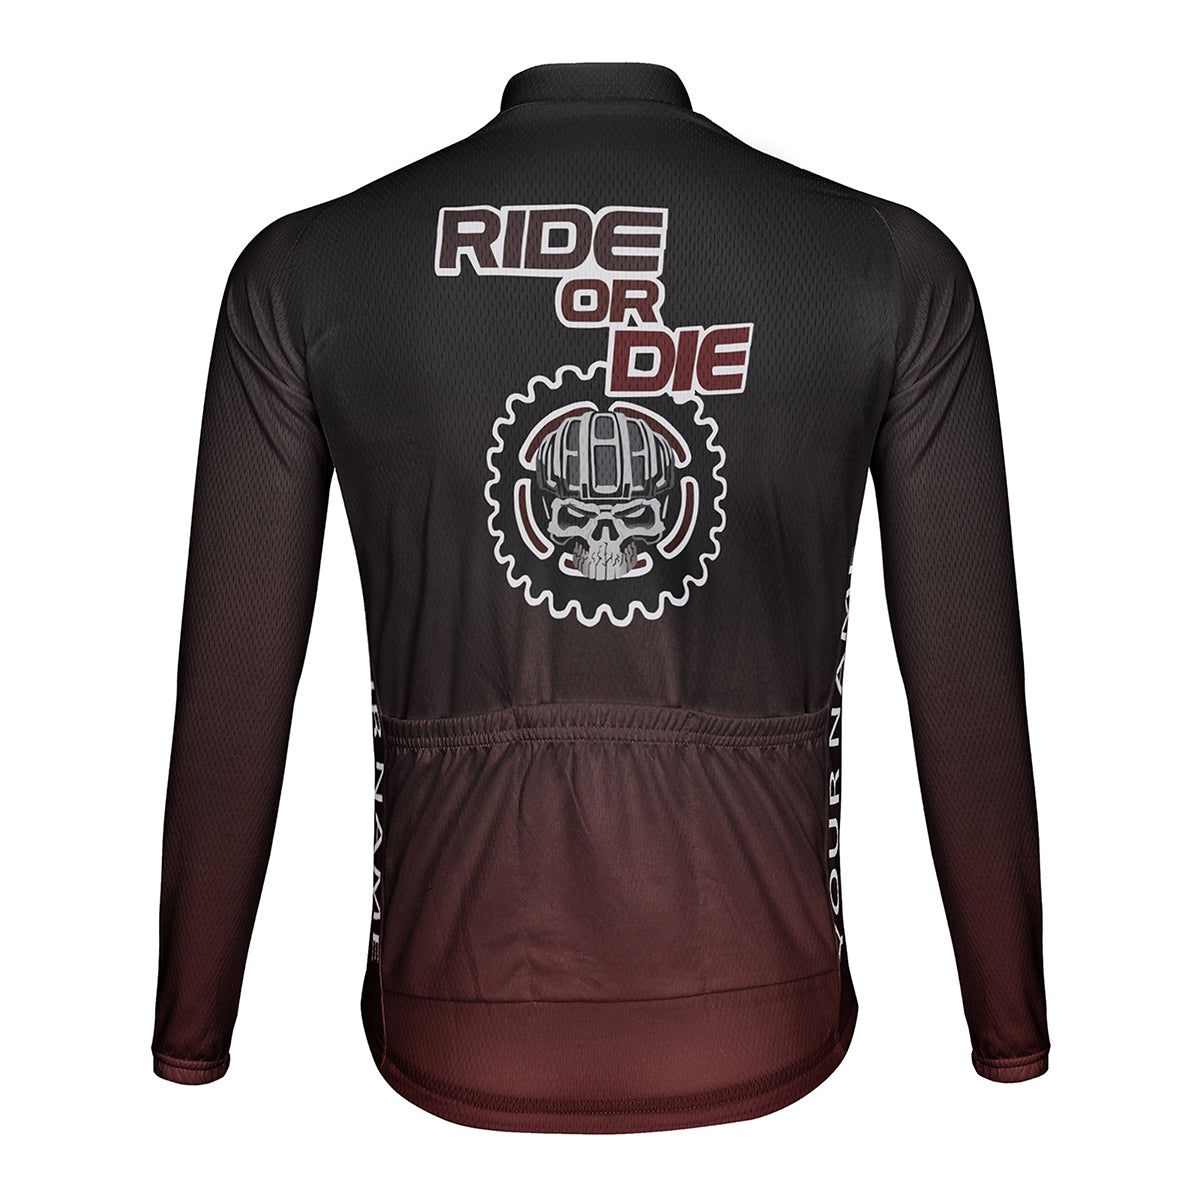 Customized Ride or Die Men's Cycling Jersey Long Sleeve